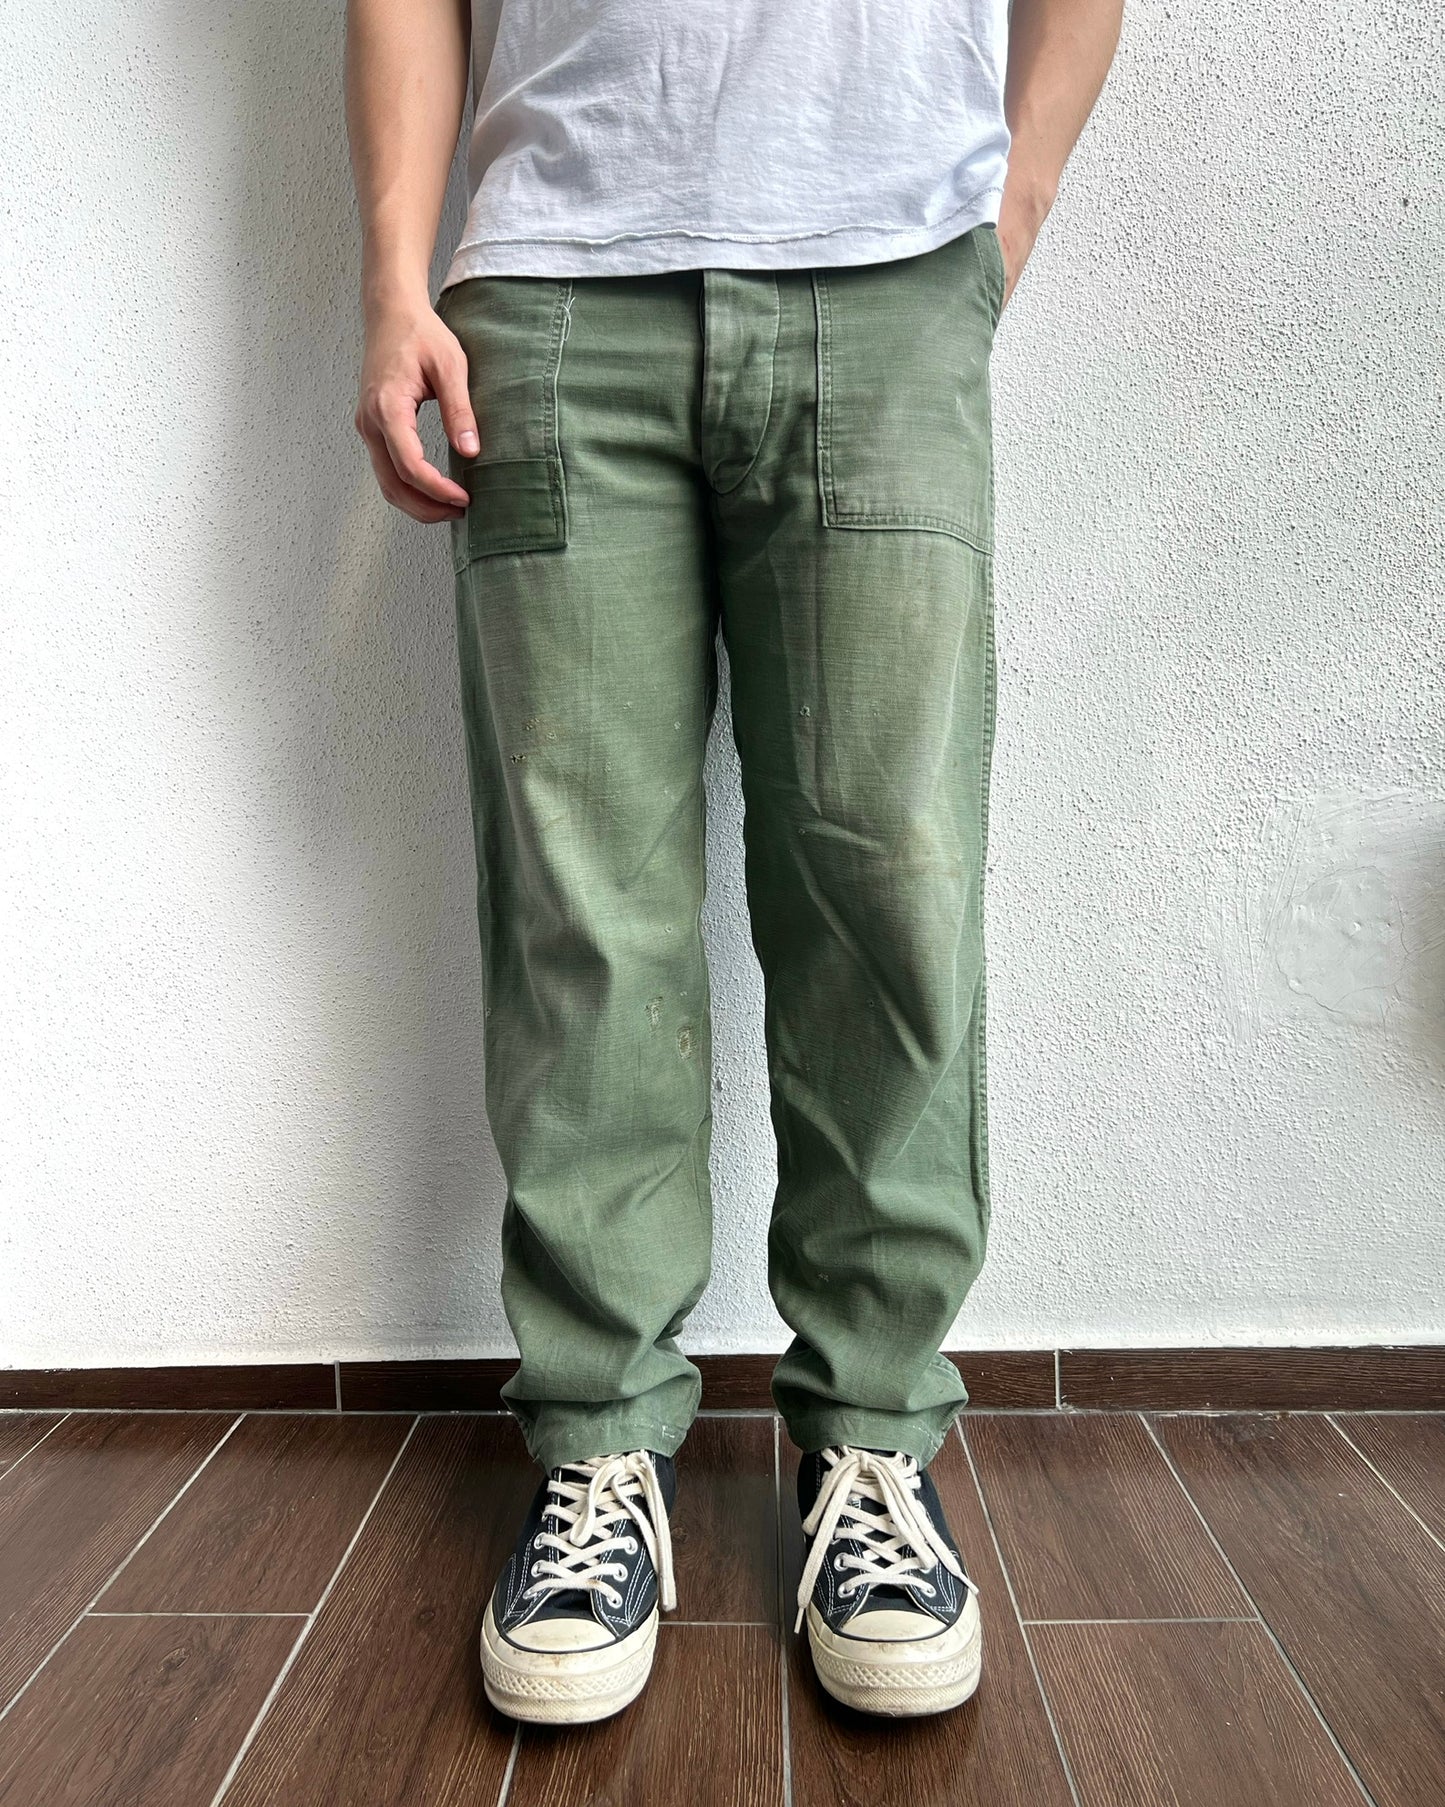 1960S REPAIRED OG-107 SATEEN US ARMY TROUSERS (32X33)